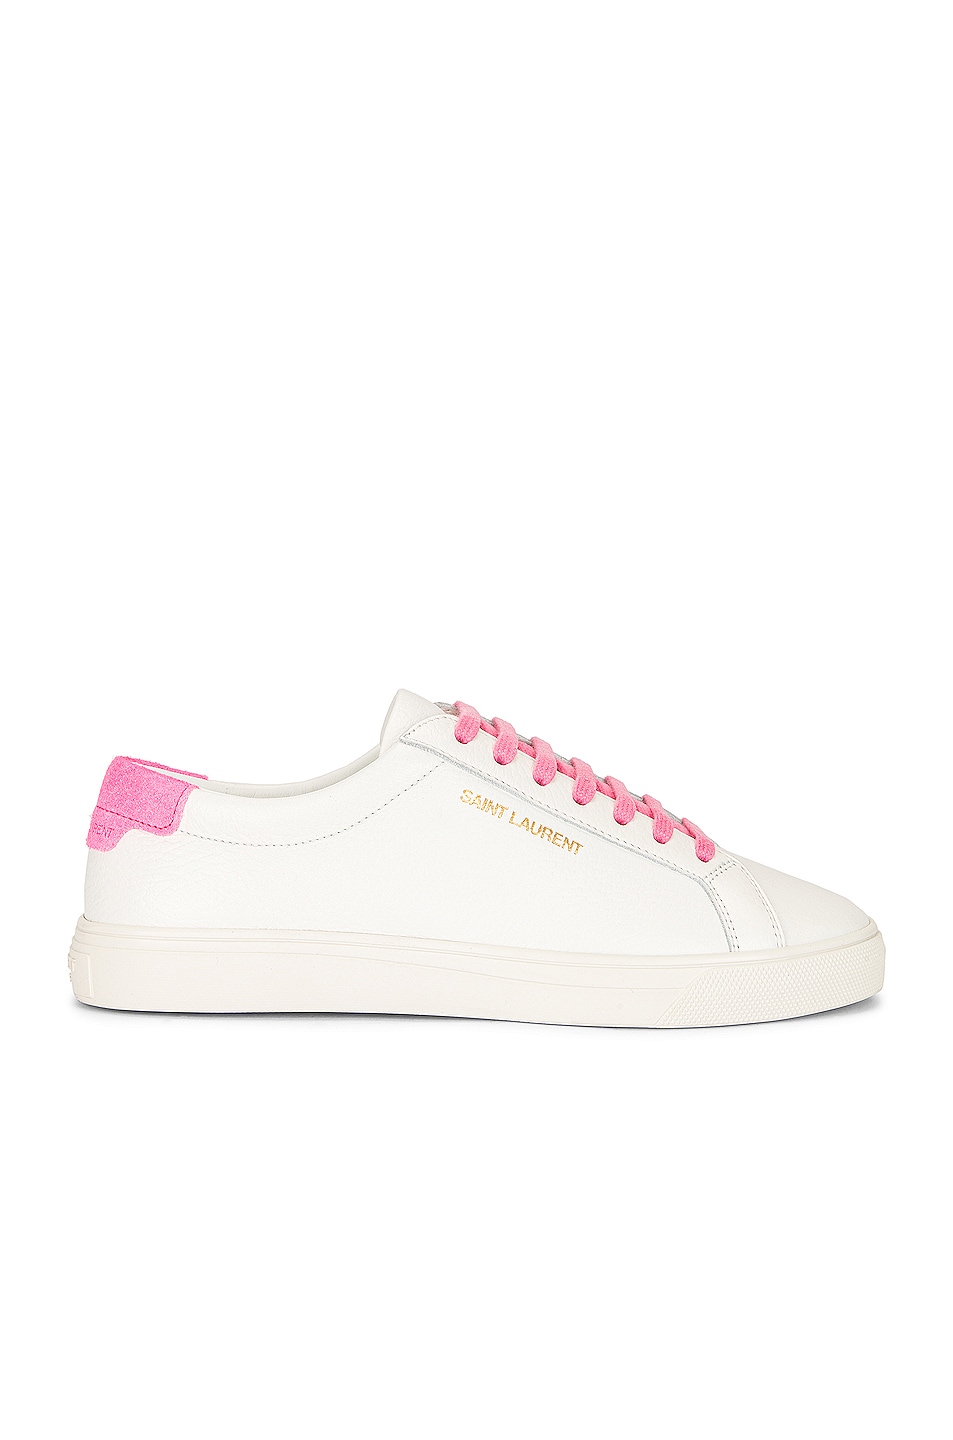 Image 1 of Saint Laurent Lace Up Sneakers in White & Pink